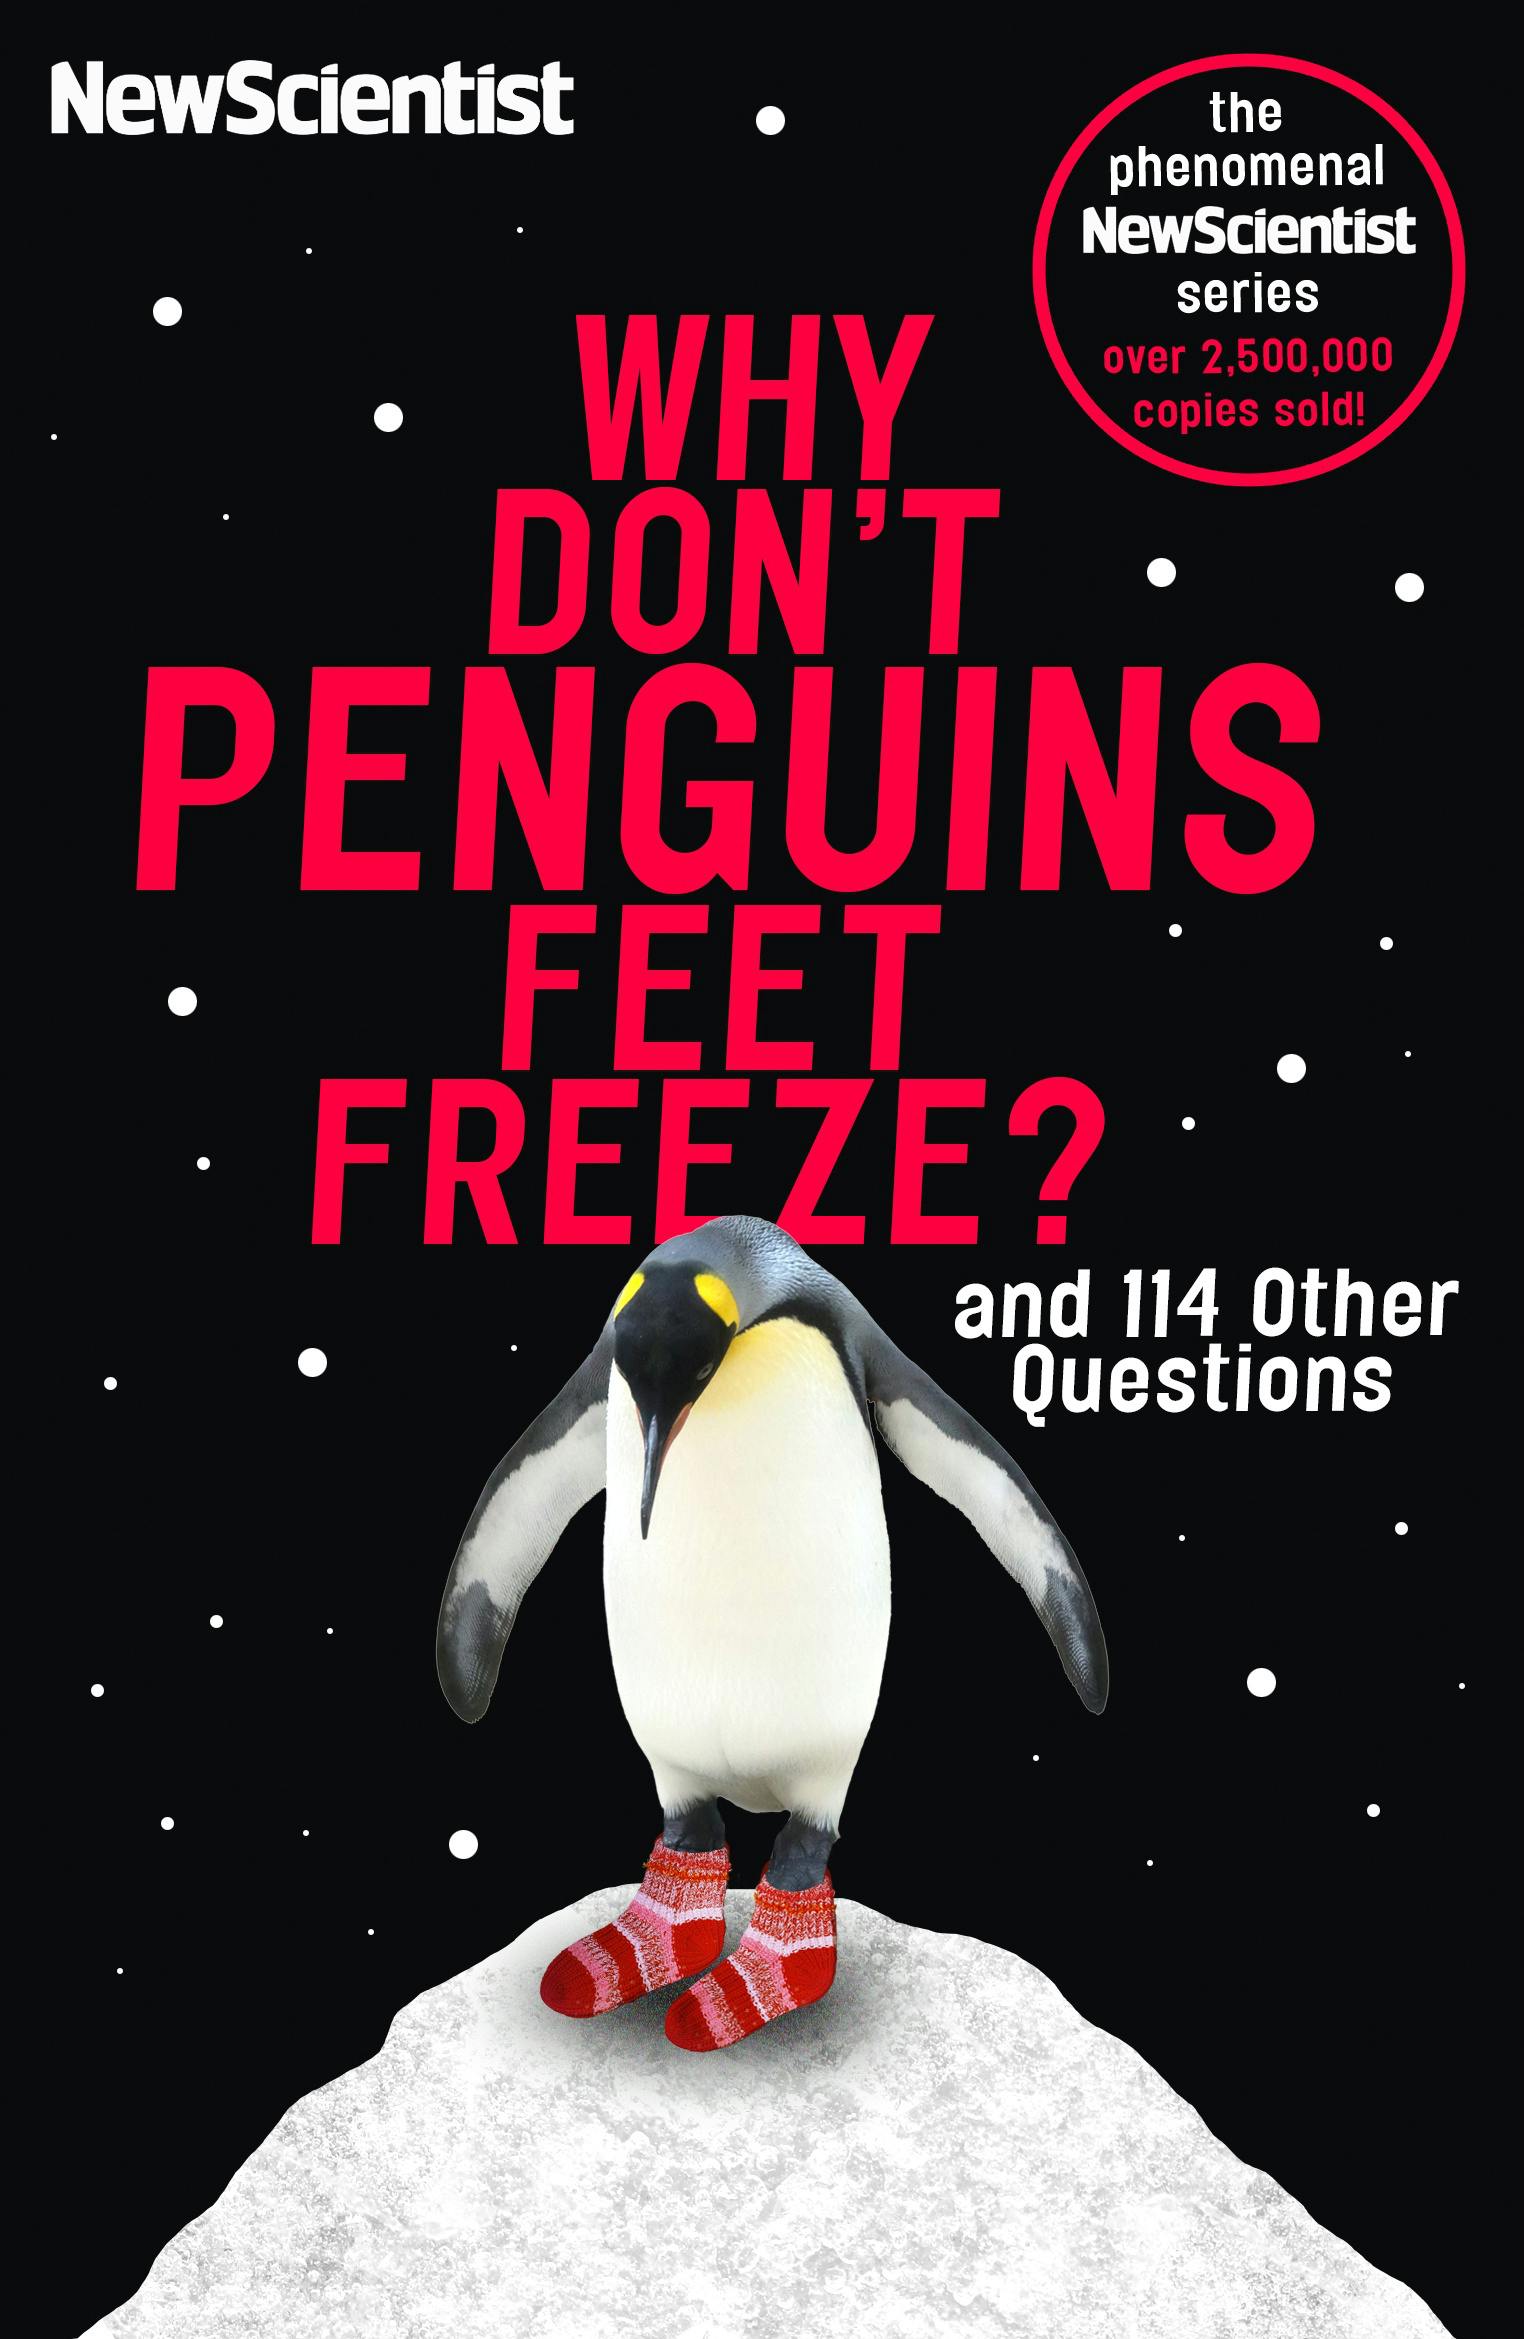 Why Don't Penguins' Feet Freeze? And 114 Other Questions by Scientist